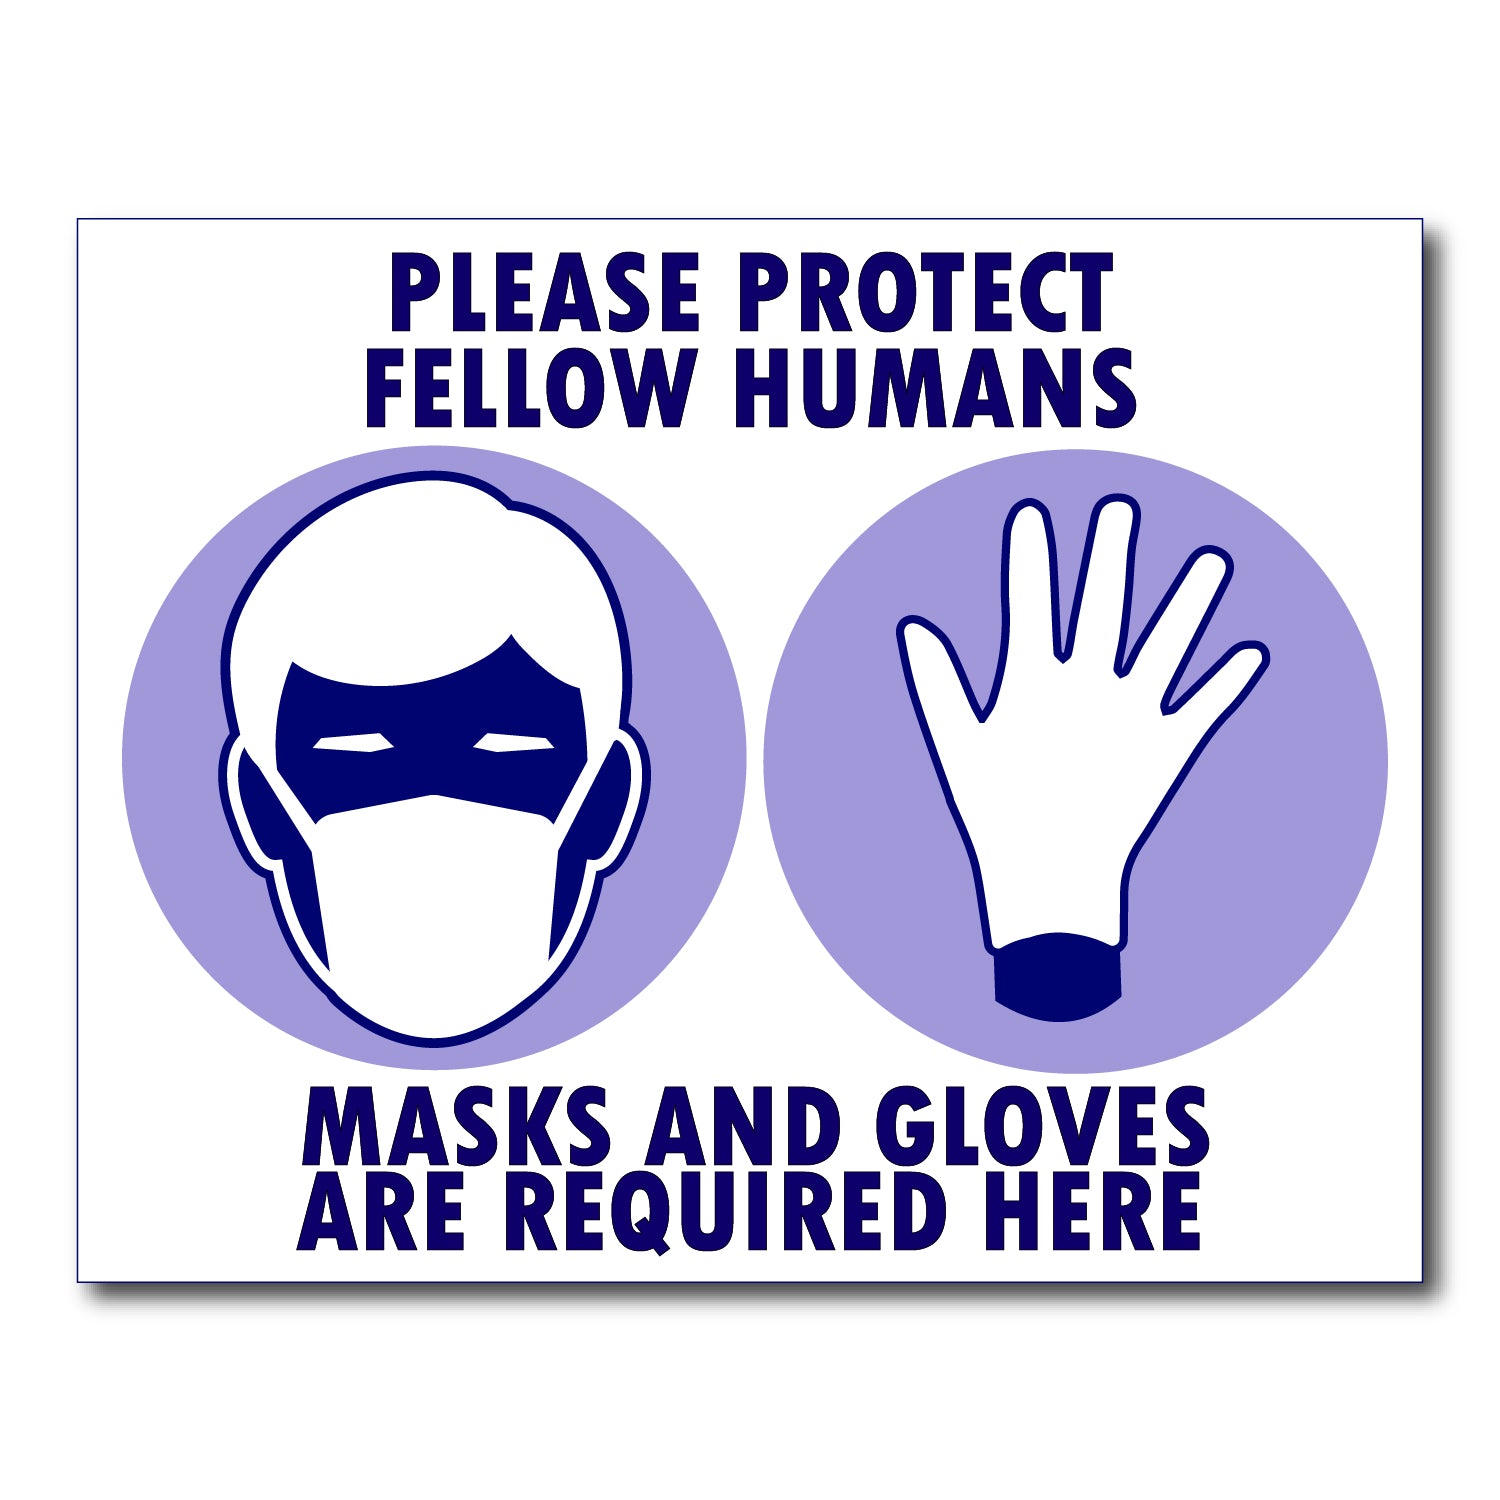 protect fellow humans mask and gloves require dcovid-19 mask and glove poster